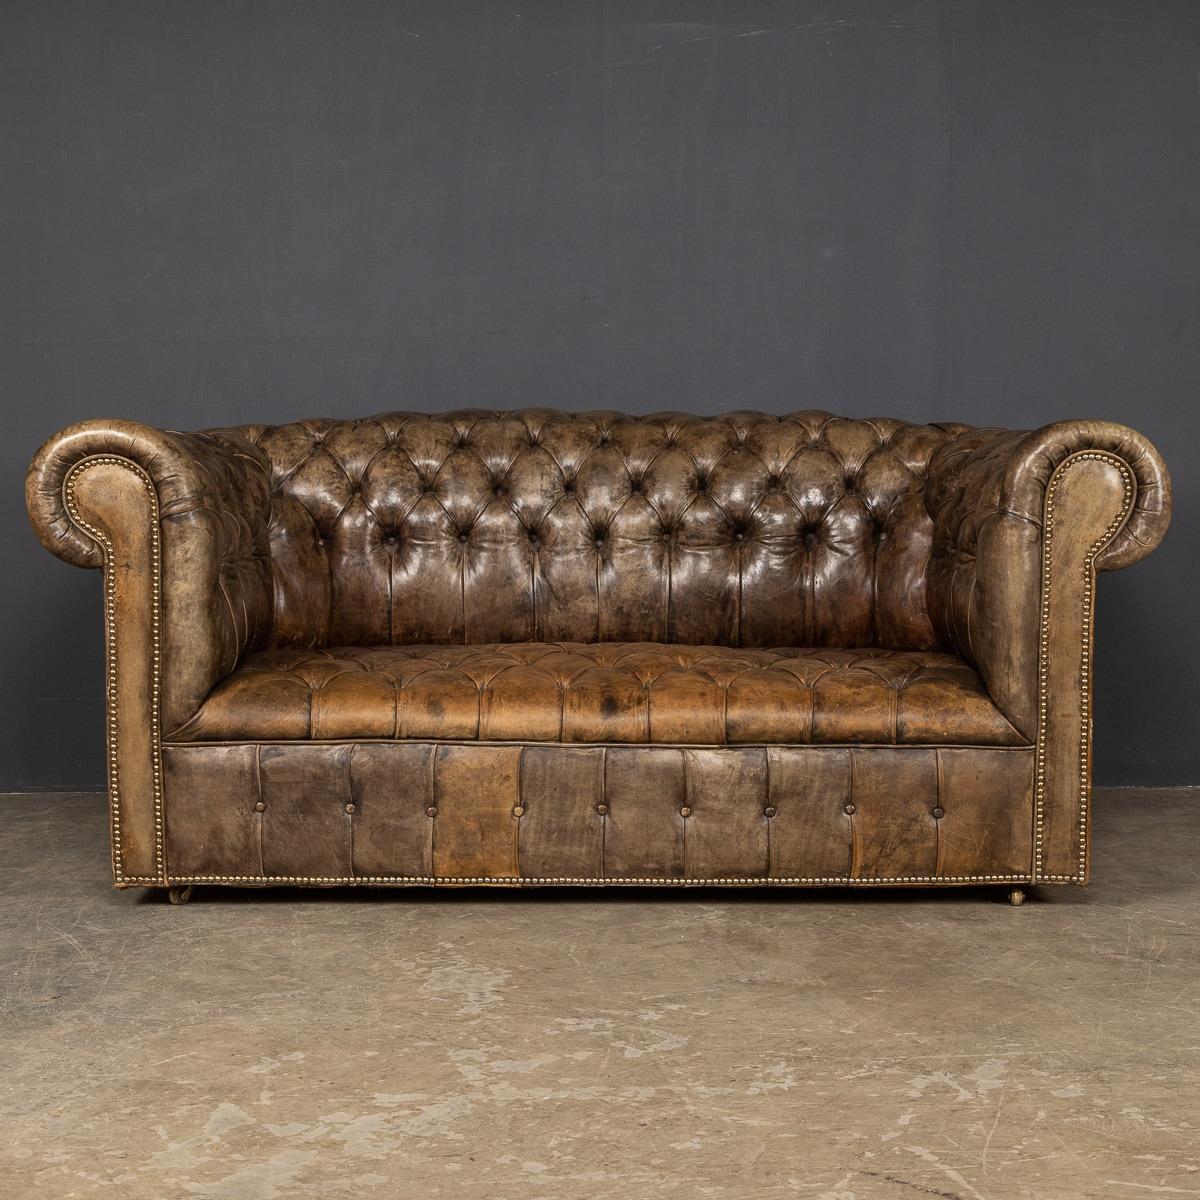 Chesterfield sofas describe a deep buttoned sofa, usually made from leather, where the arms and back of the same height. The first Chesterfield, with its distinctive deep buttoned, quilted leather upholstery and lower seat base, was commissioned by